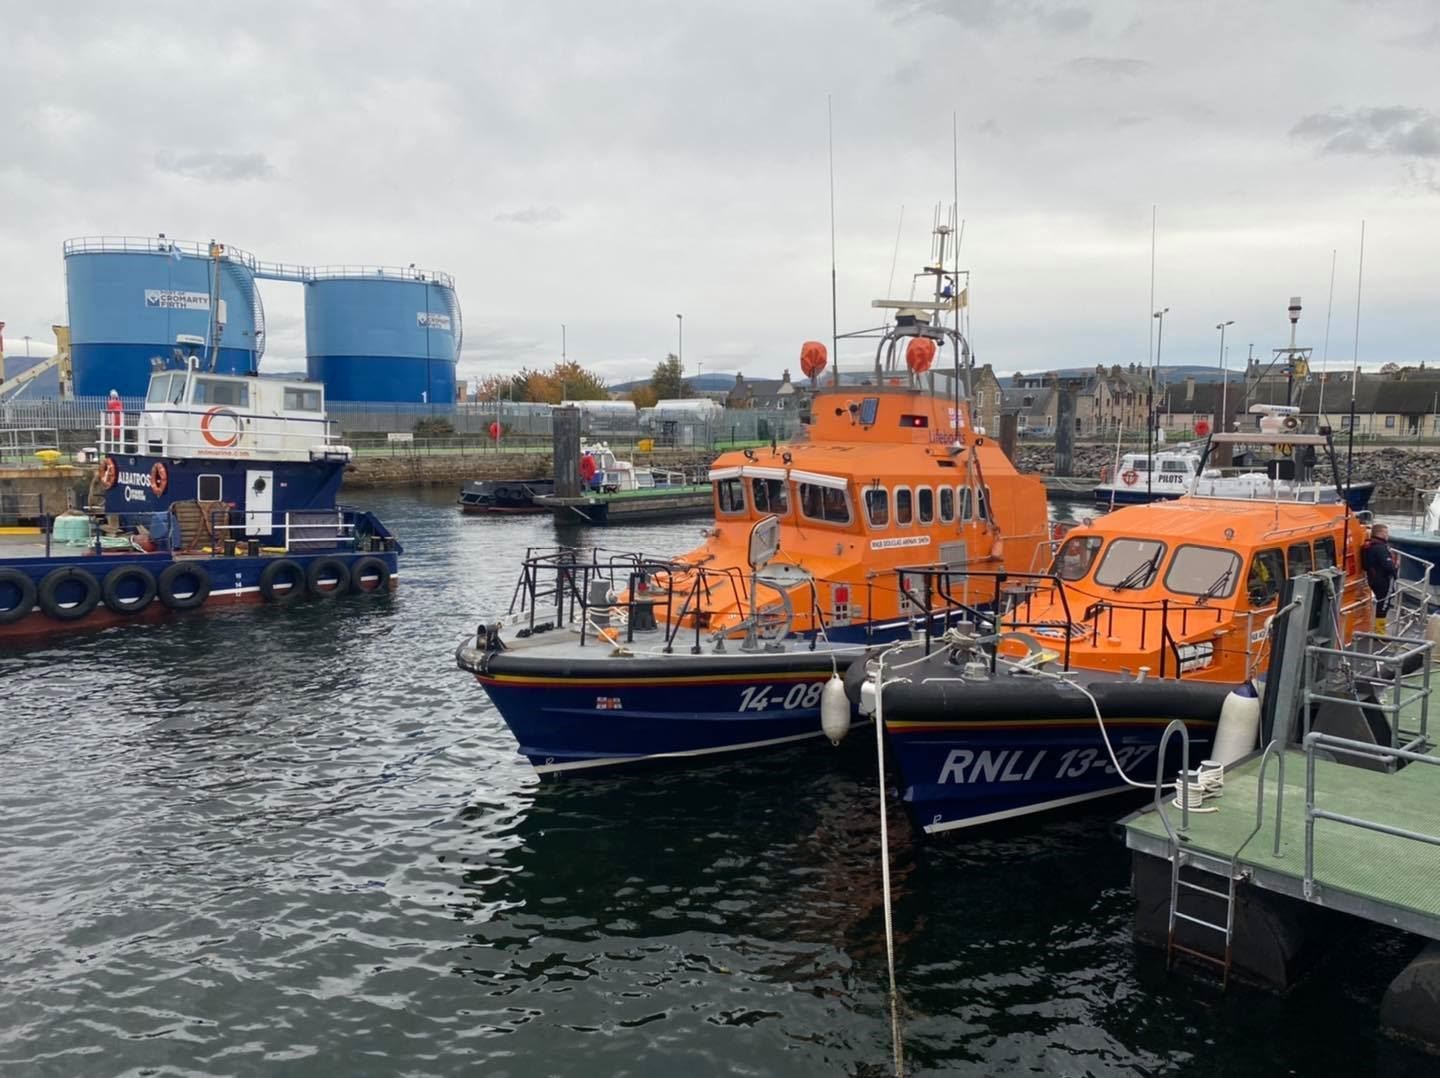 Strong wind gusts of up to 101mph were recorded today at Invergordon lifeboat station. Picture: Invergordon Lifeboat RNLI